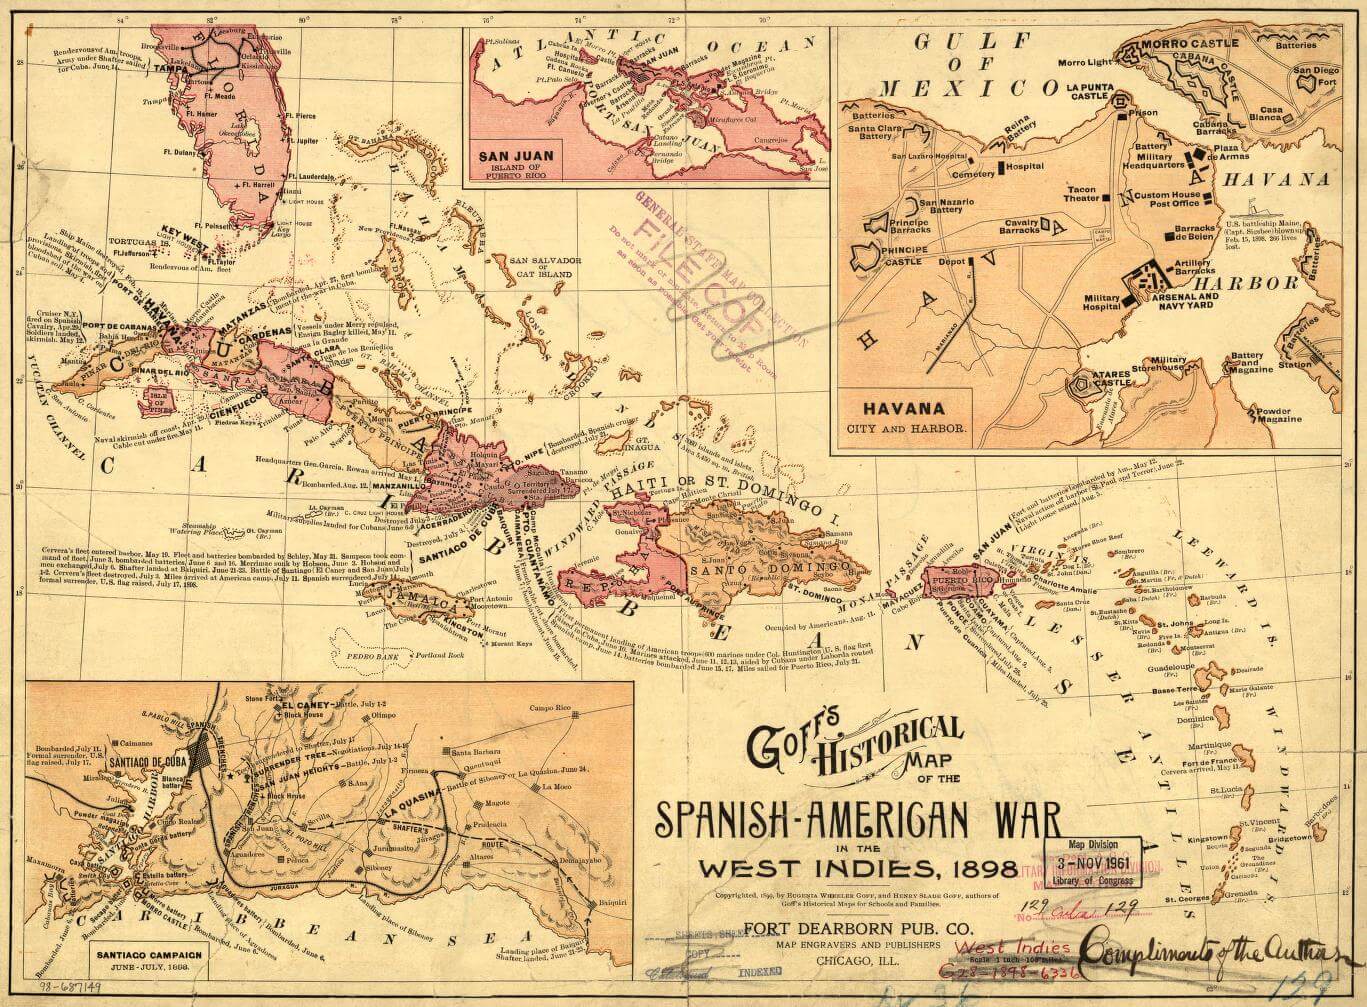 A map of the Spanish-American War